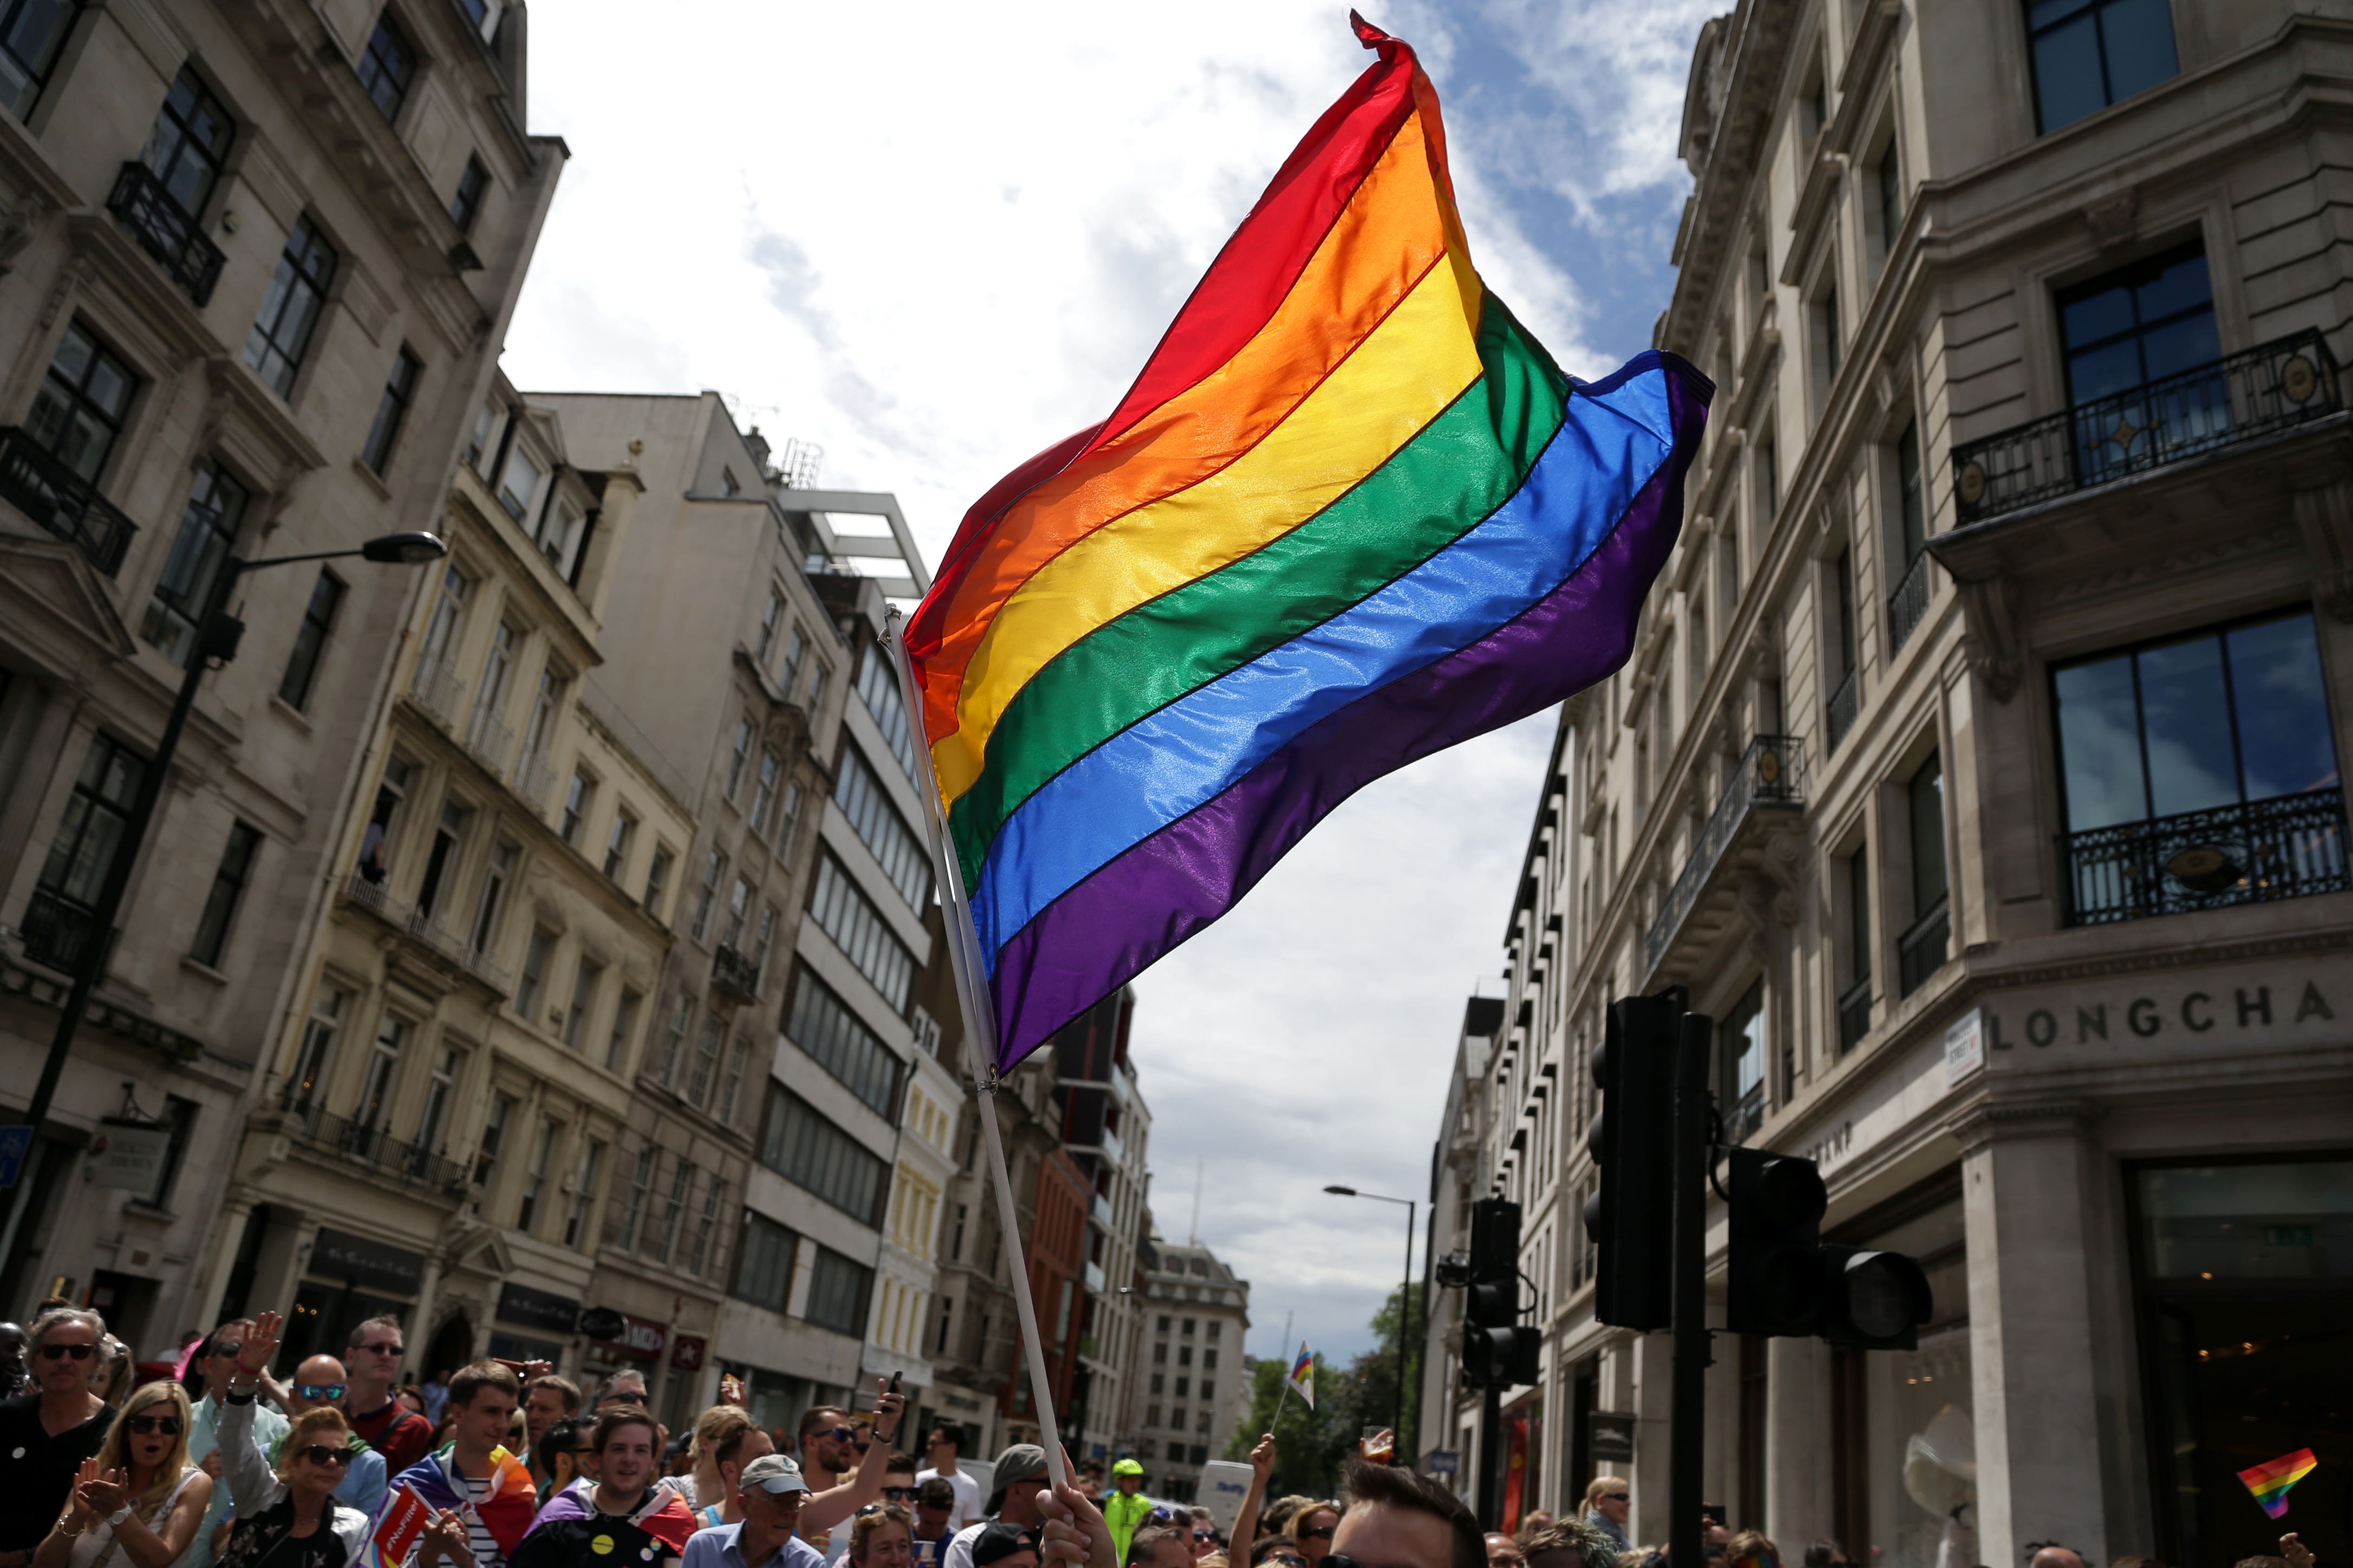 Bisexual people experience worse health outcomes than other adults in England, research suggests (Daniel Leal-Olivas/PA)